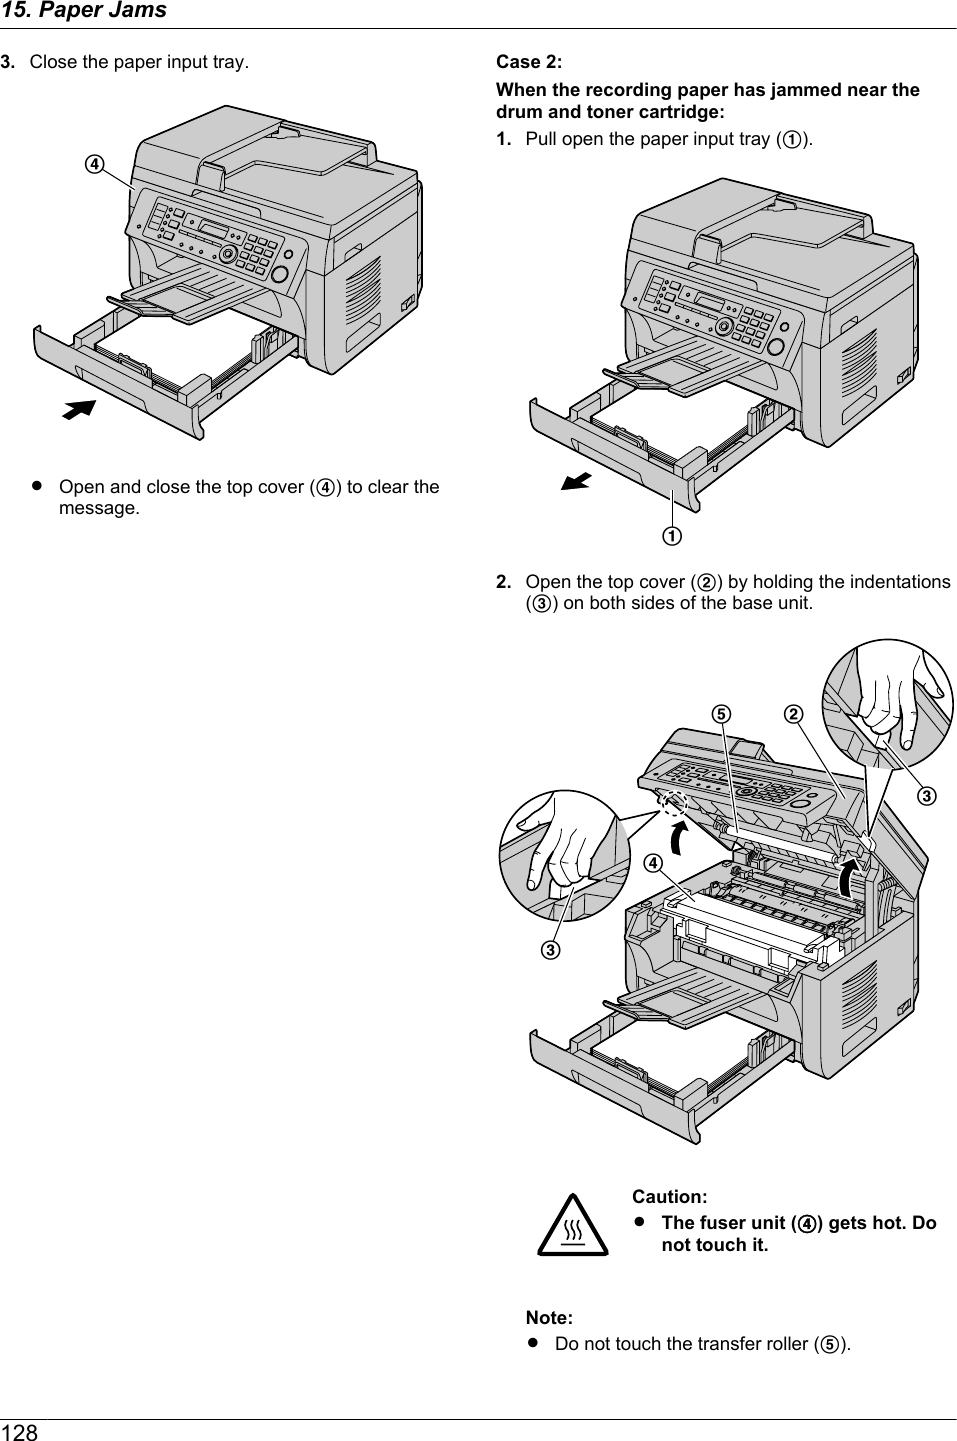 3. Close the paper input tray.DROpen and close the top cover (D) to clear themessage.Case 2:When the recording paper has jammed near thedrum and toner cartridge:1. Pull open the paper input tray (A).A2. Open the top cover (B) by holding the indentations(C) on both sides of the base unit.DEBCCCaution:RThe fuser unit (D) gets hot. Donot touch it.Note:RDo not touch the transfer roller (E).12815. Paper Jams